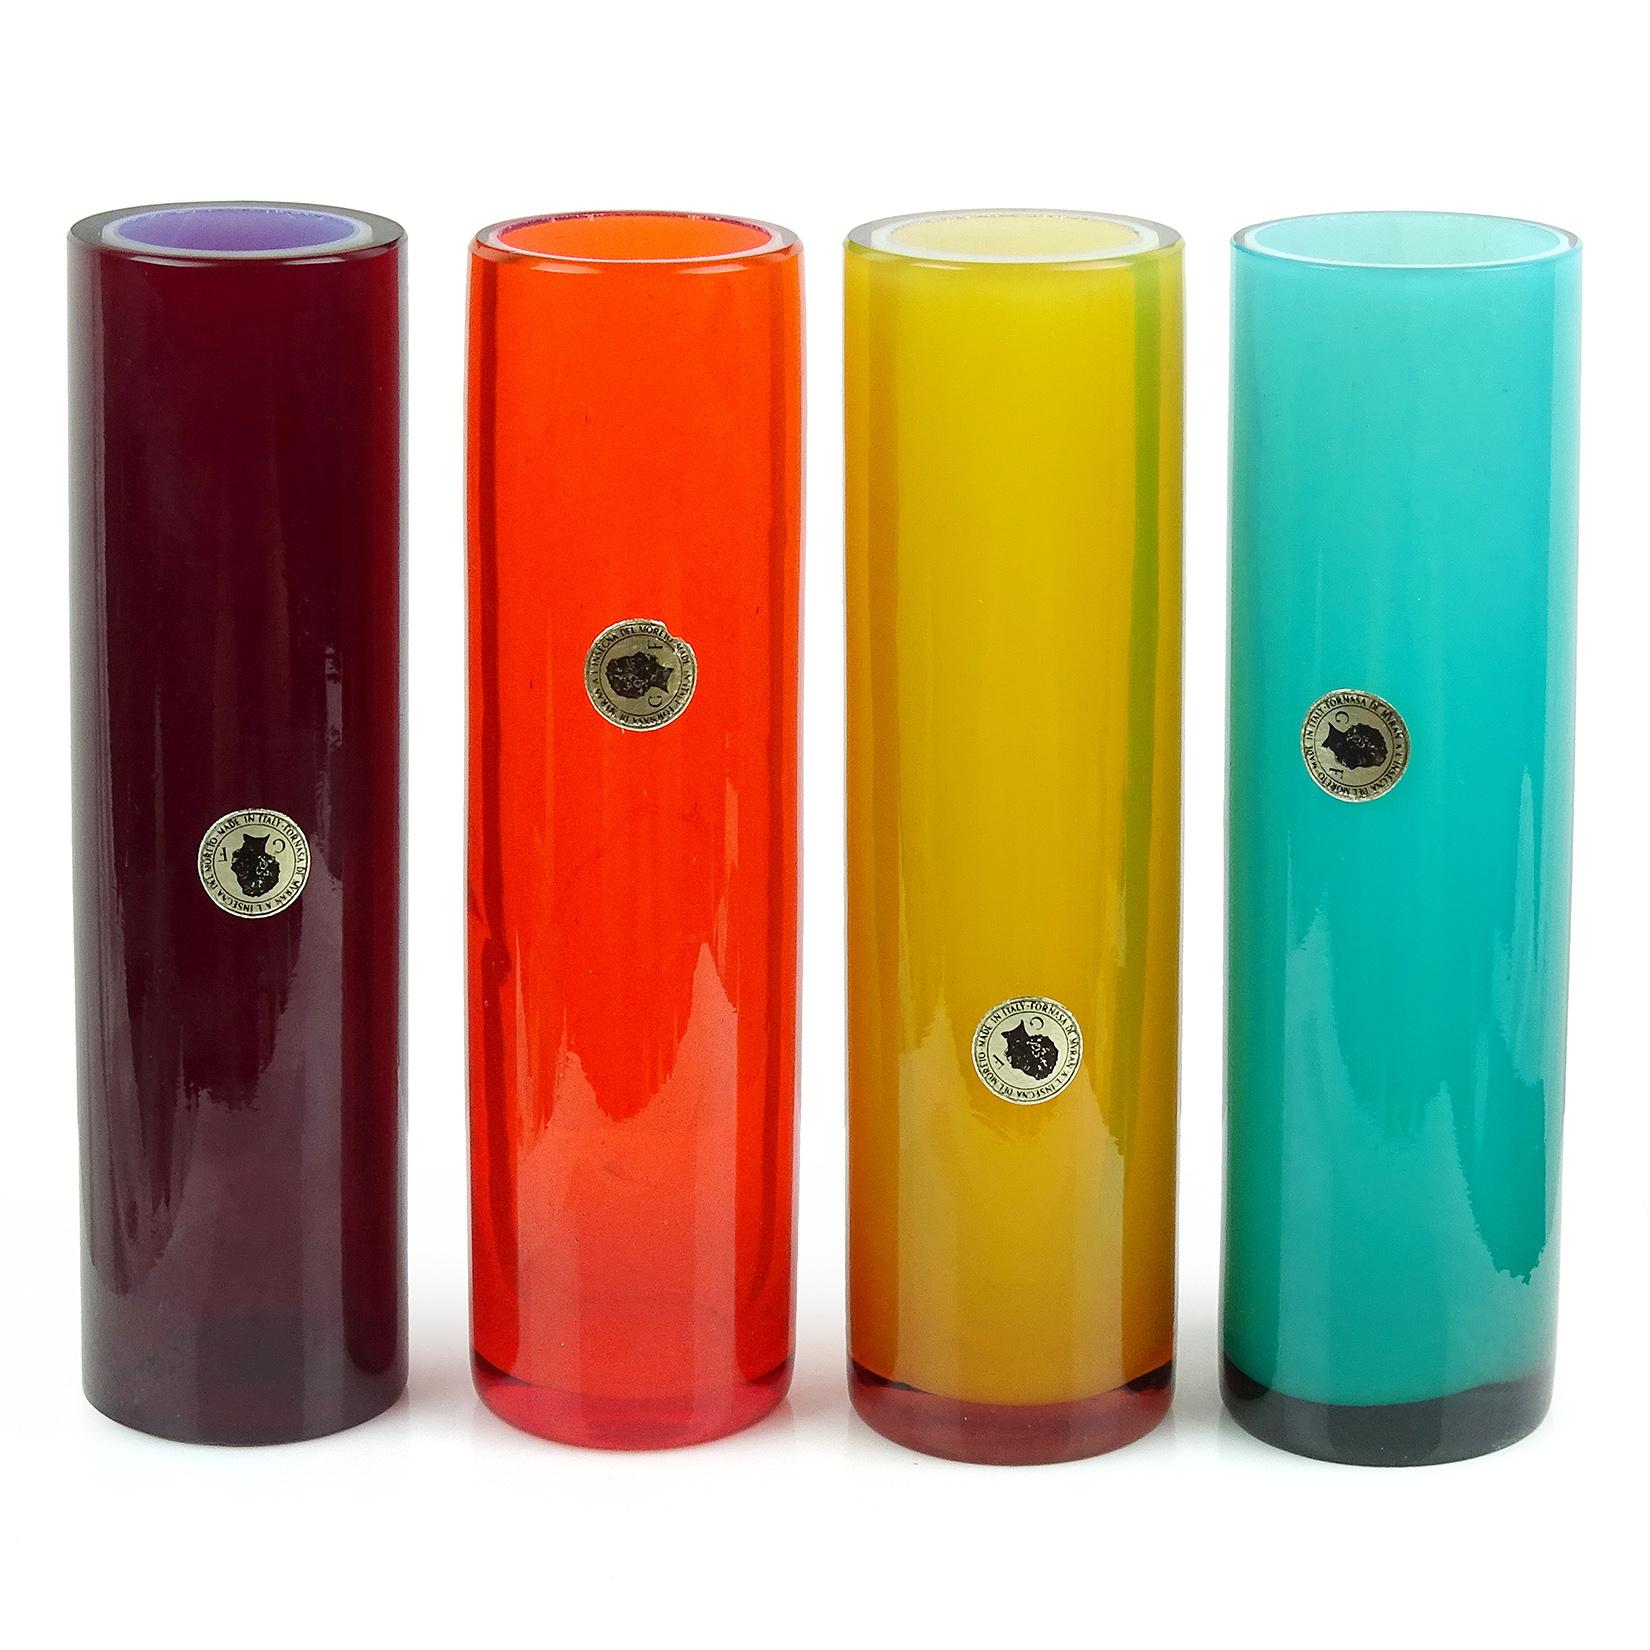 Priced per vase (4 colors available as shown). Beautiful vintage Murano hand blown opalescent dark red, bright orange, yellow and light blue Italian art glass flower vases. Documented to designer Galliano Ferro, for the Fornasa De Murano A L'Insegna